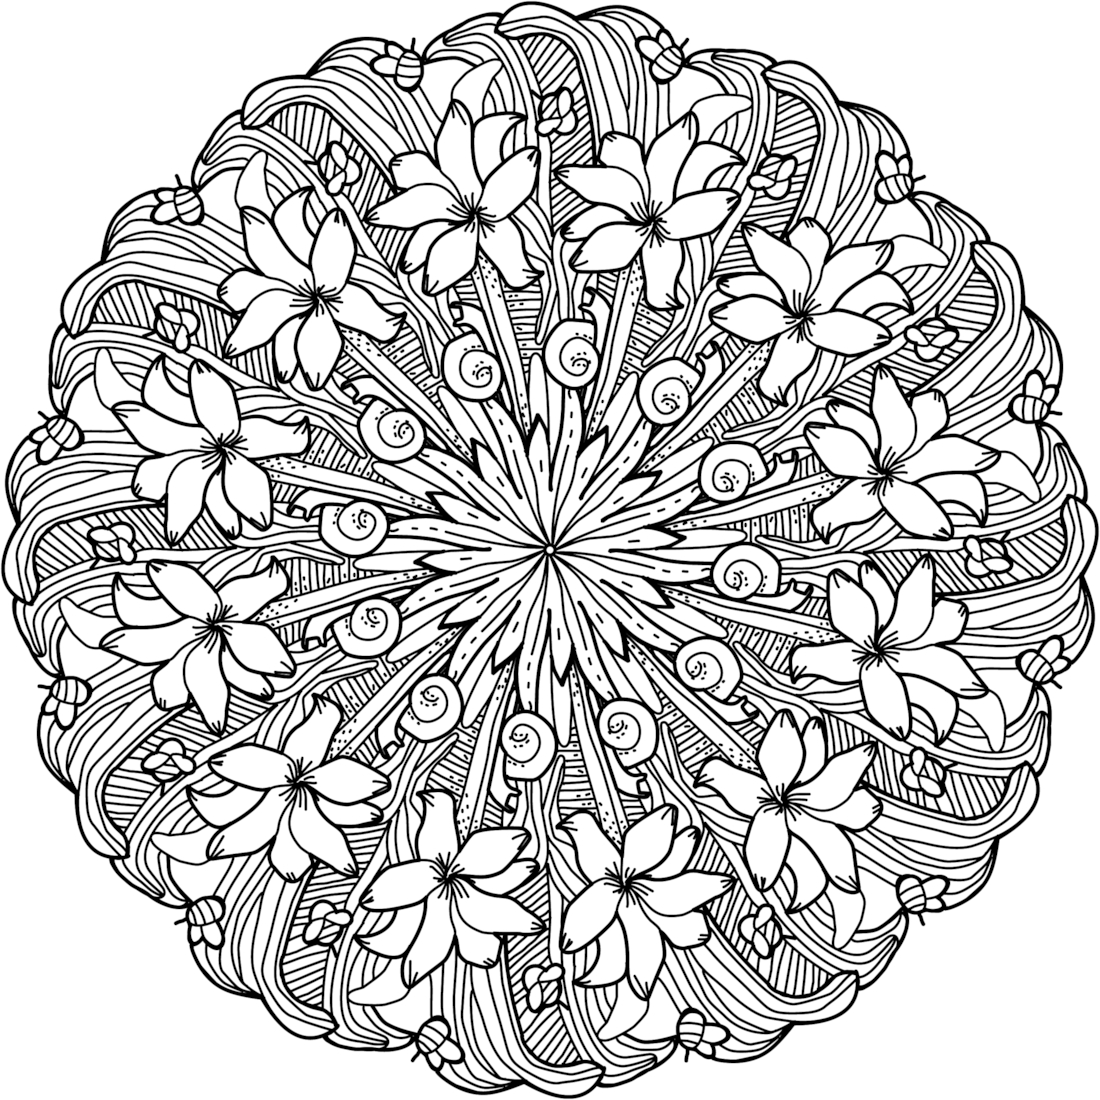 Free Printable Coloring Pages For Adults Advanced - Coloring Pages - Free Printable Coloring Books For Adults